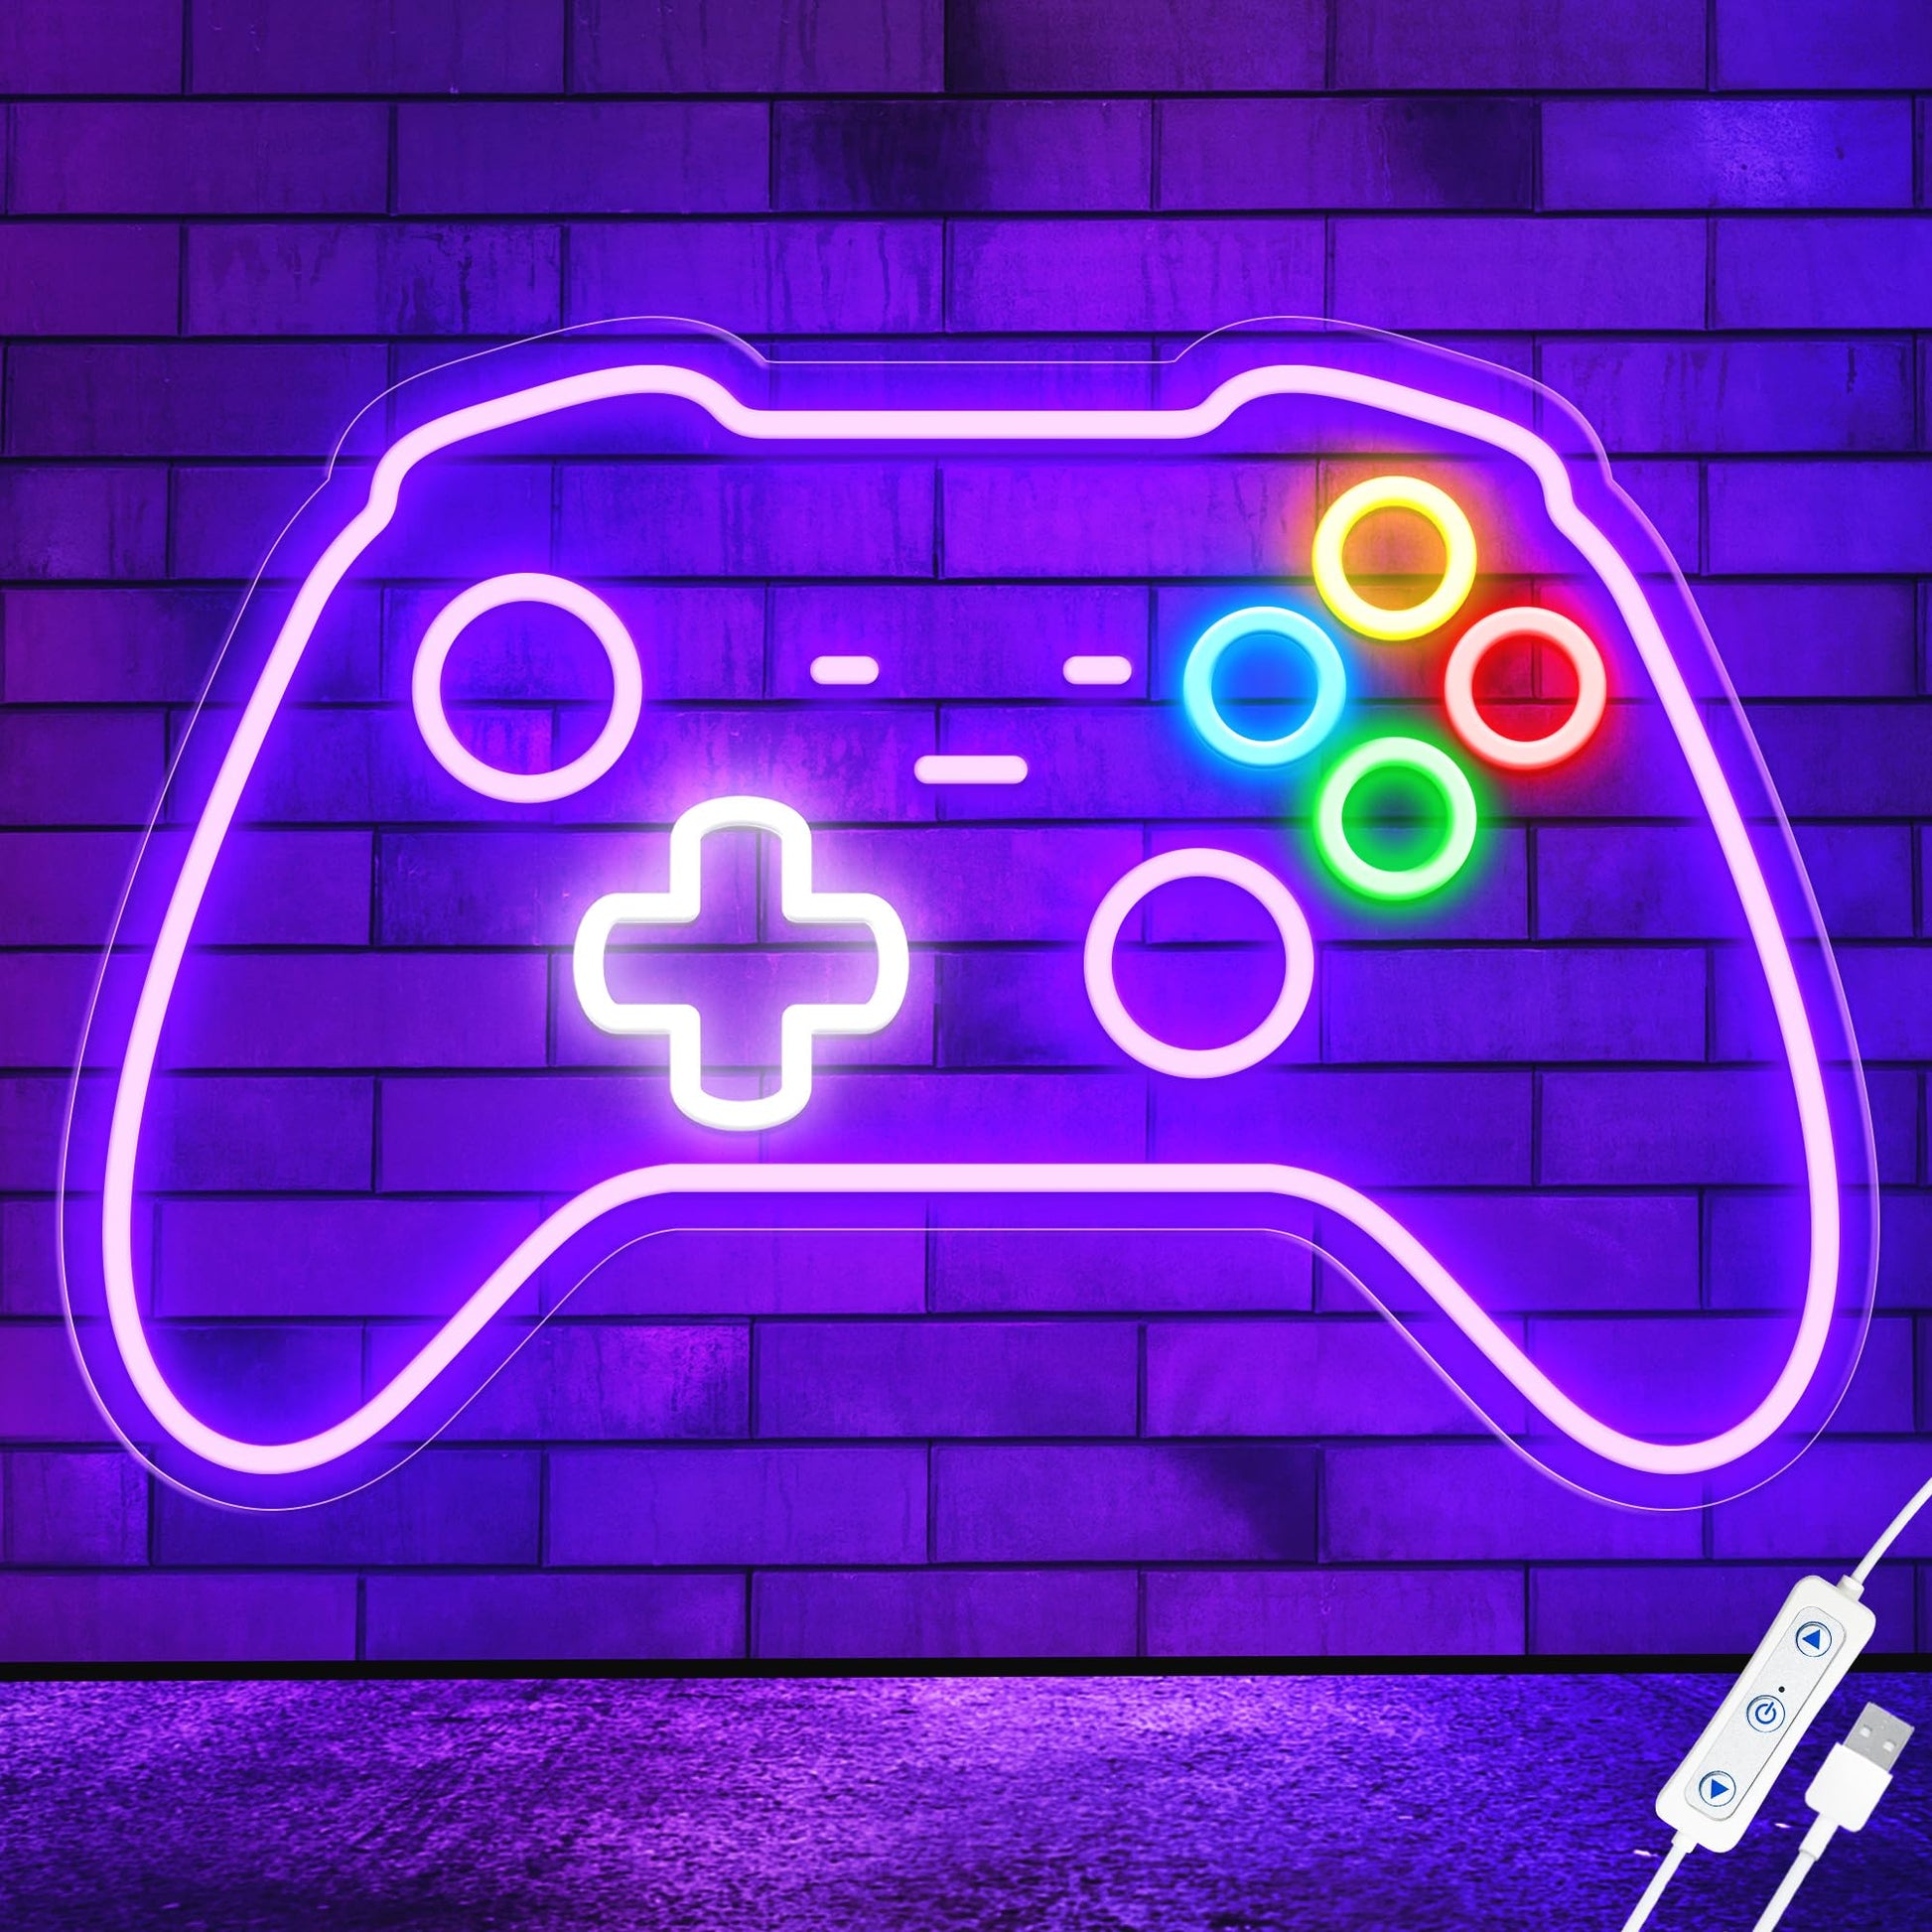 CULOIS Gamer Neon Sign, Gamepad Shaped LED Neon Sign for Gamer Room Decor, Neon Gaming Sign for Gaming Wall Decor, USB Powered Best Gamer Gifts for Teens, Boys, Kids - amzGamess